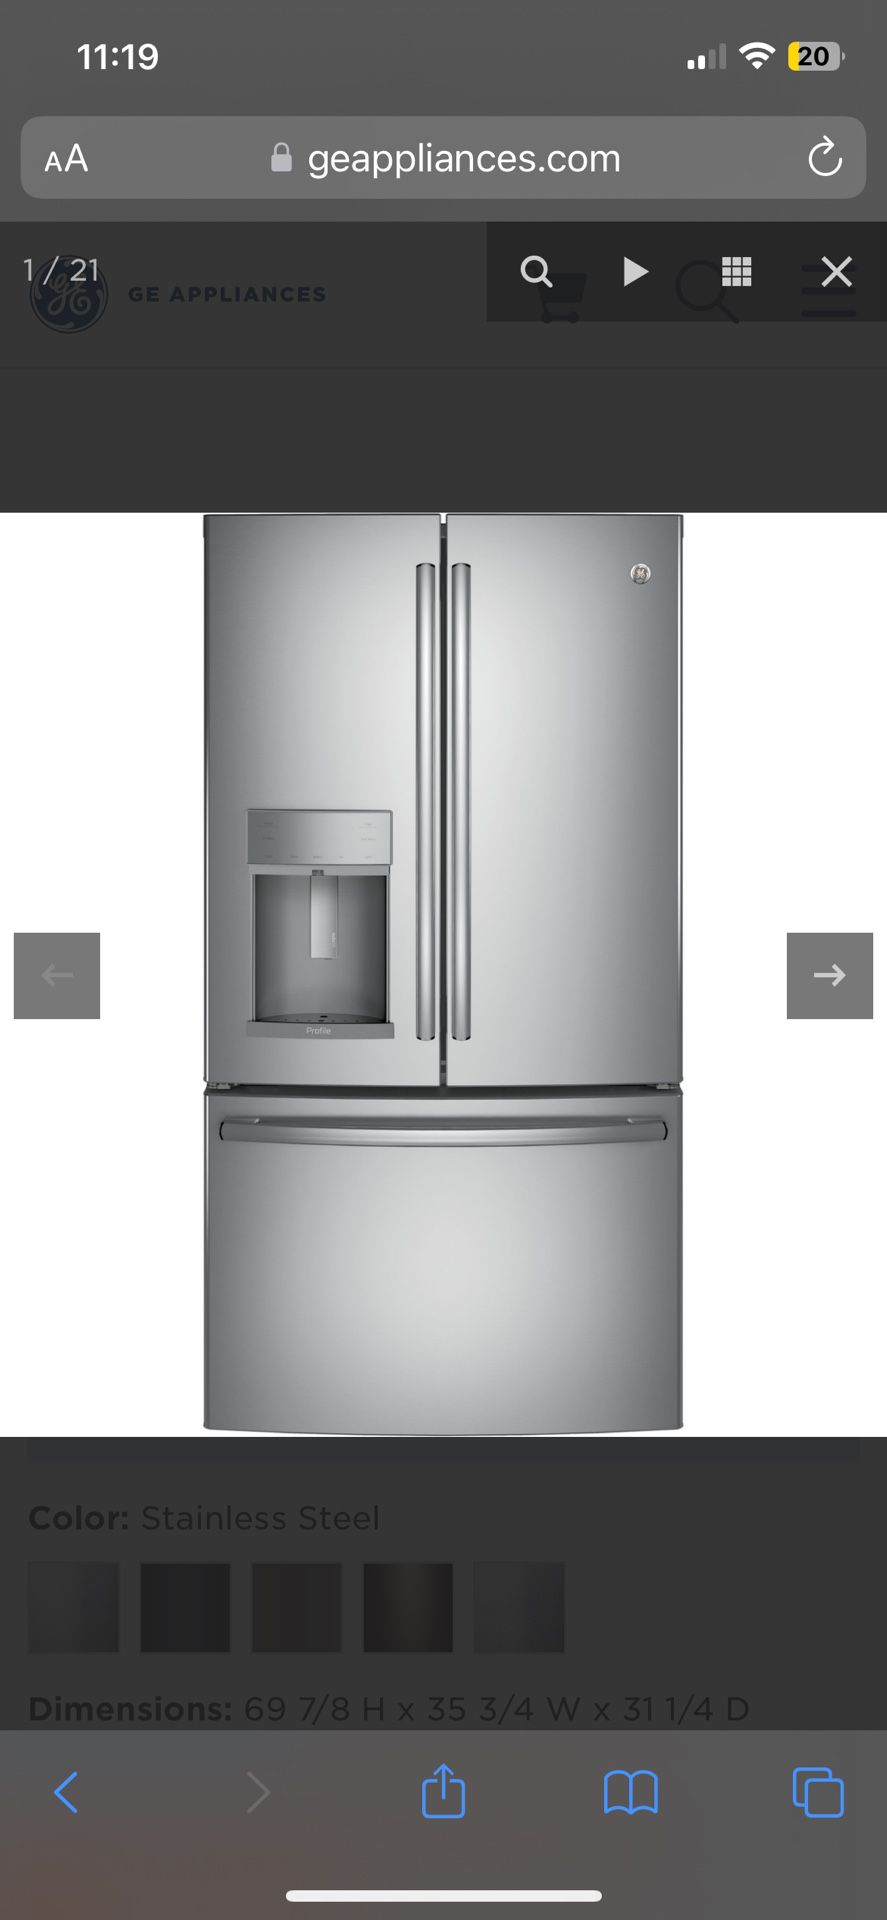 GE Profile™ Series ENERGY STAR® 22.1 Cu. Ft. Counter-Depth French-Door Refrigerator with Hands-Free